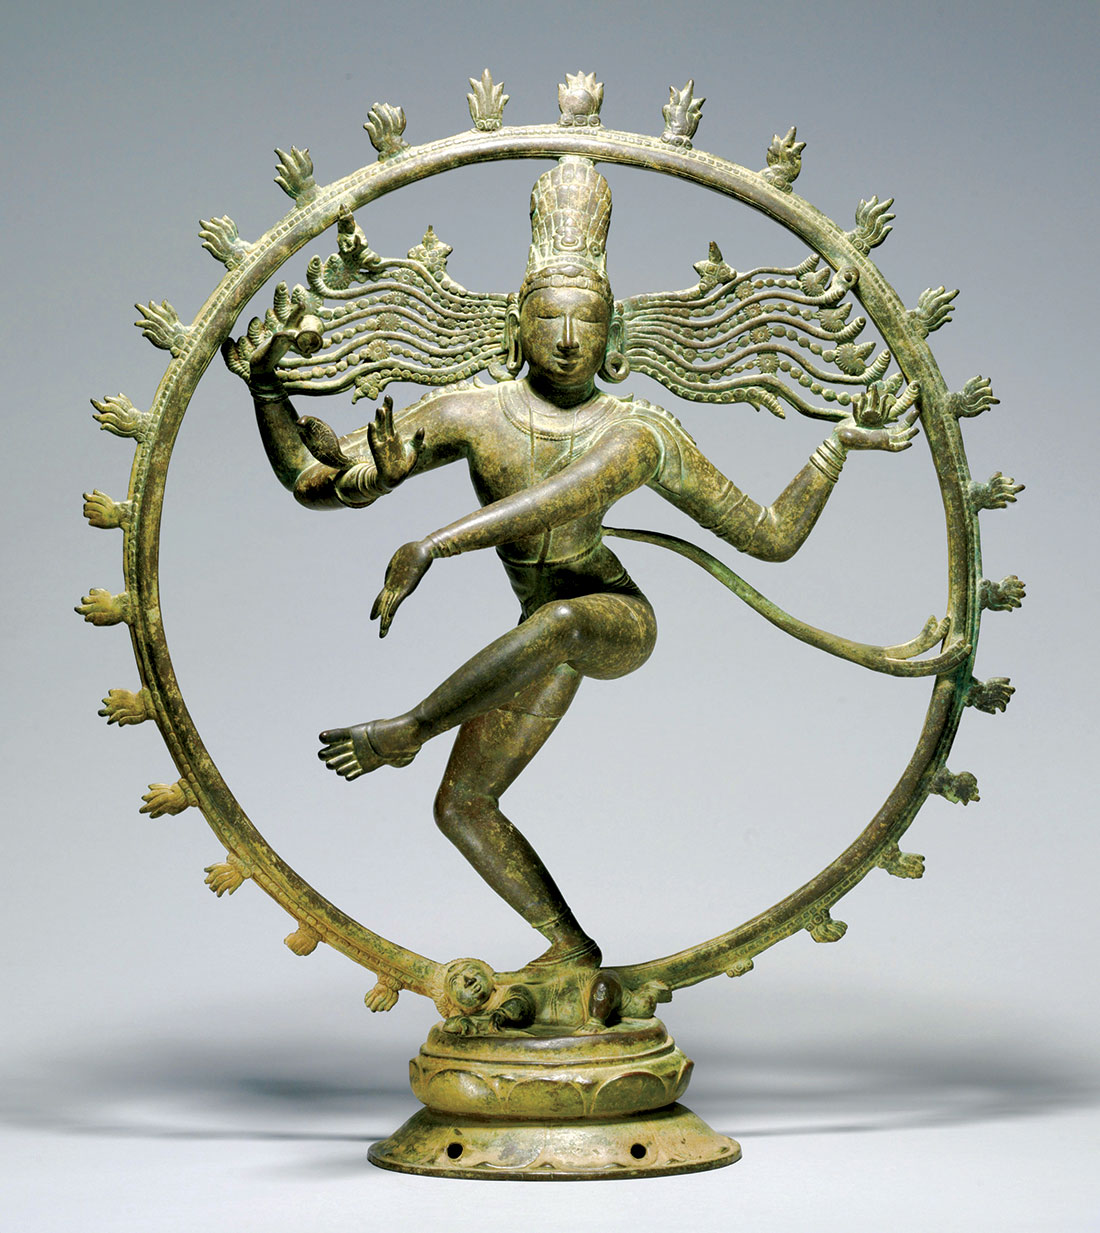 Touching the divine: Shiva as Lord of the Dance, bronze, Chola period, 10th-11th century.